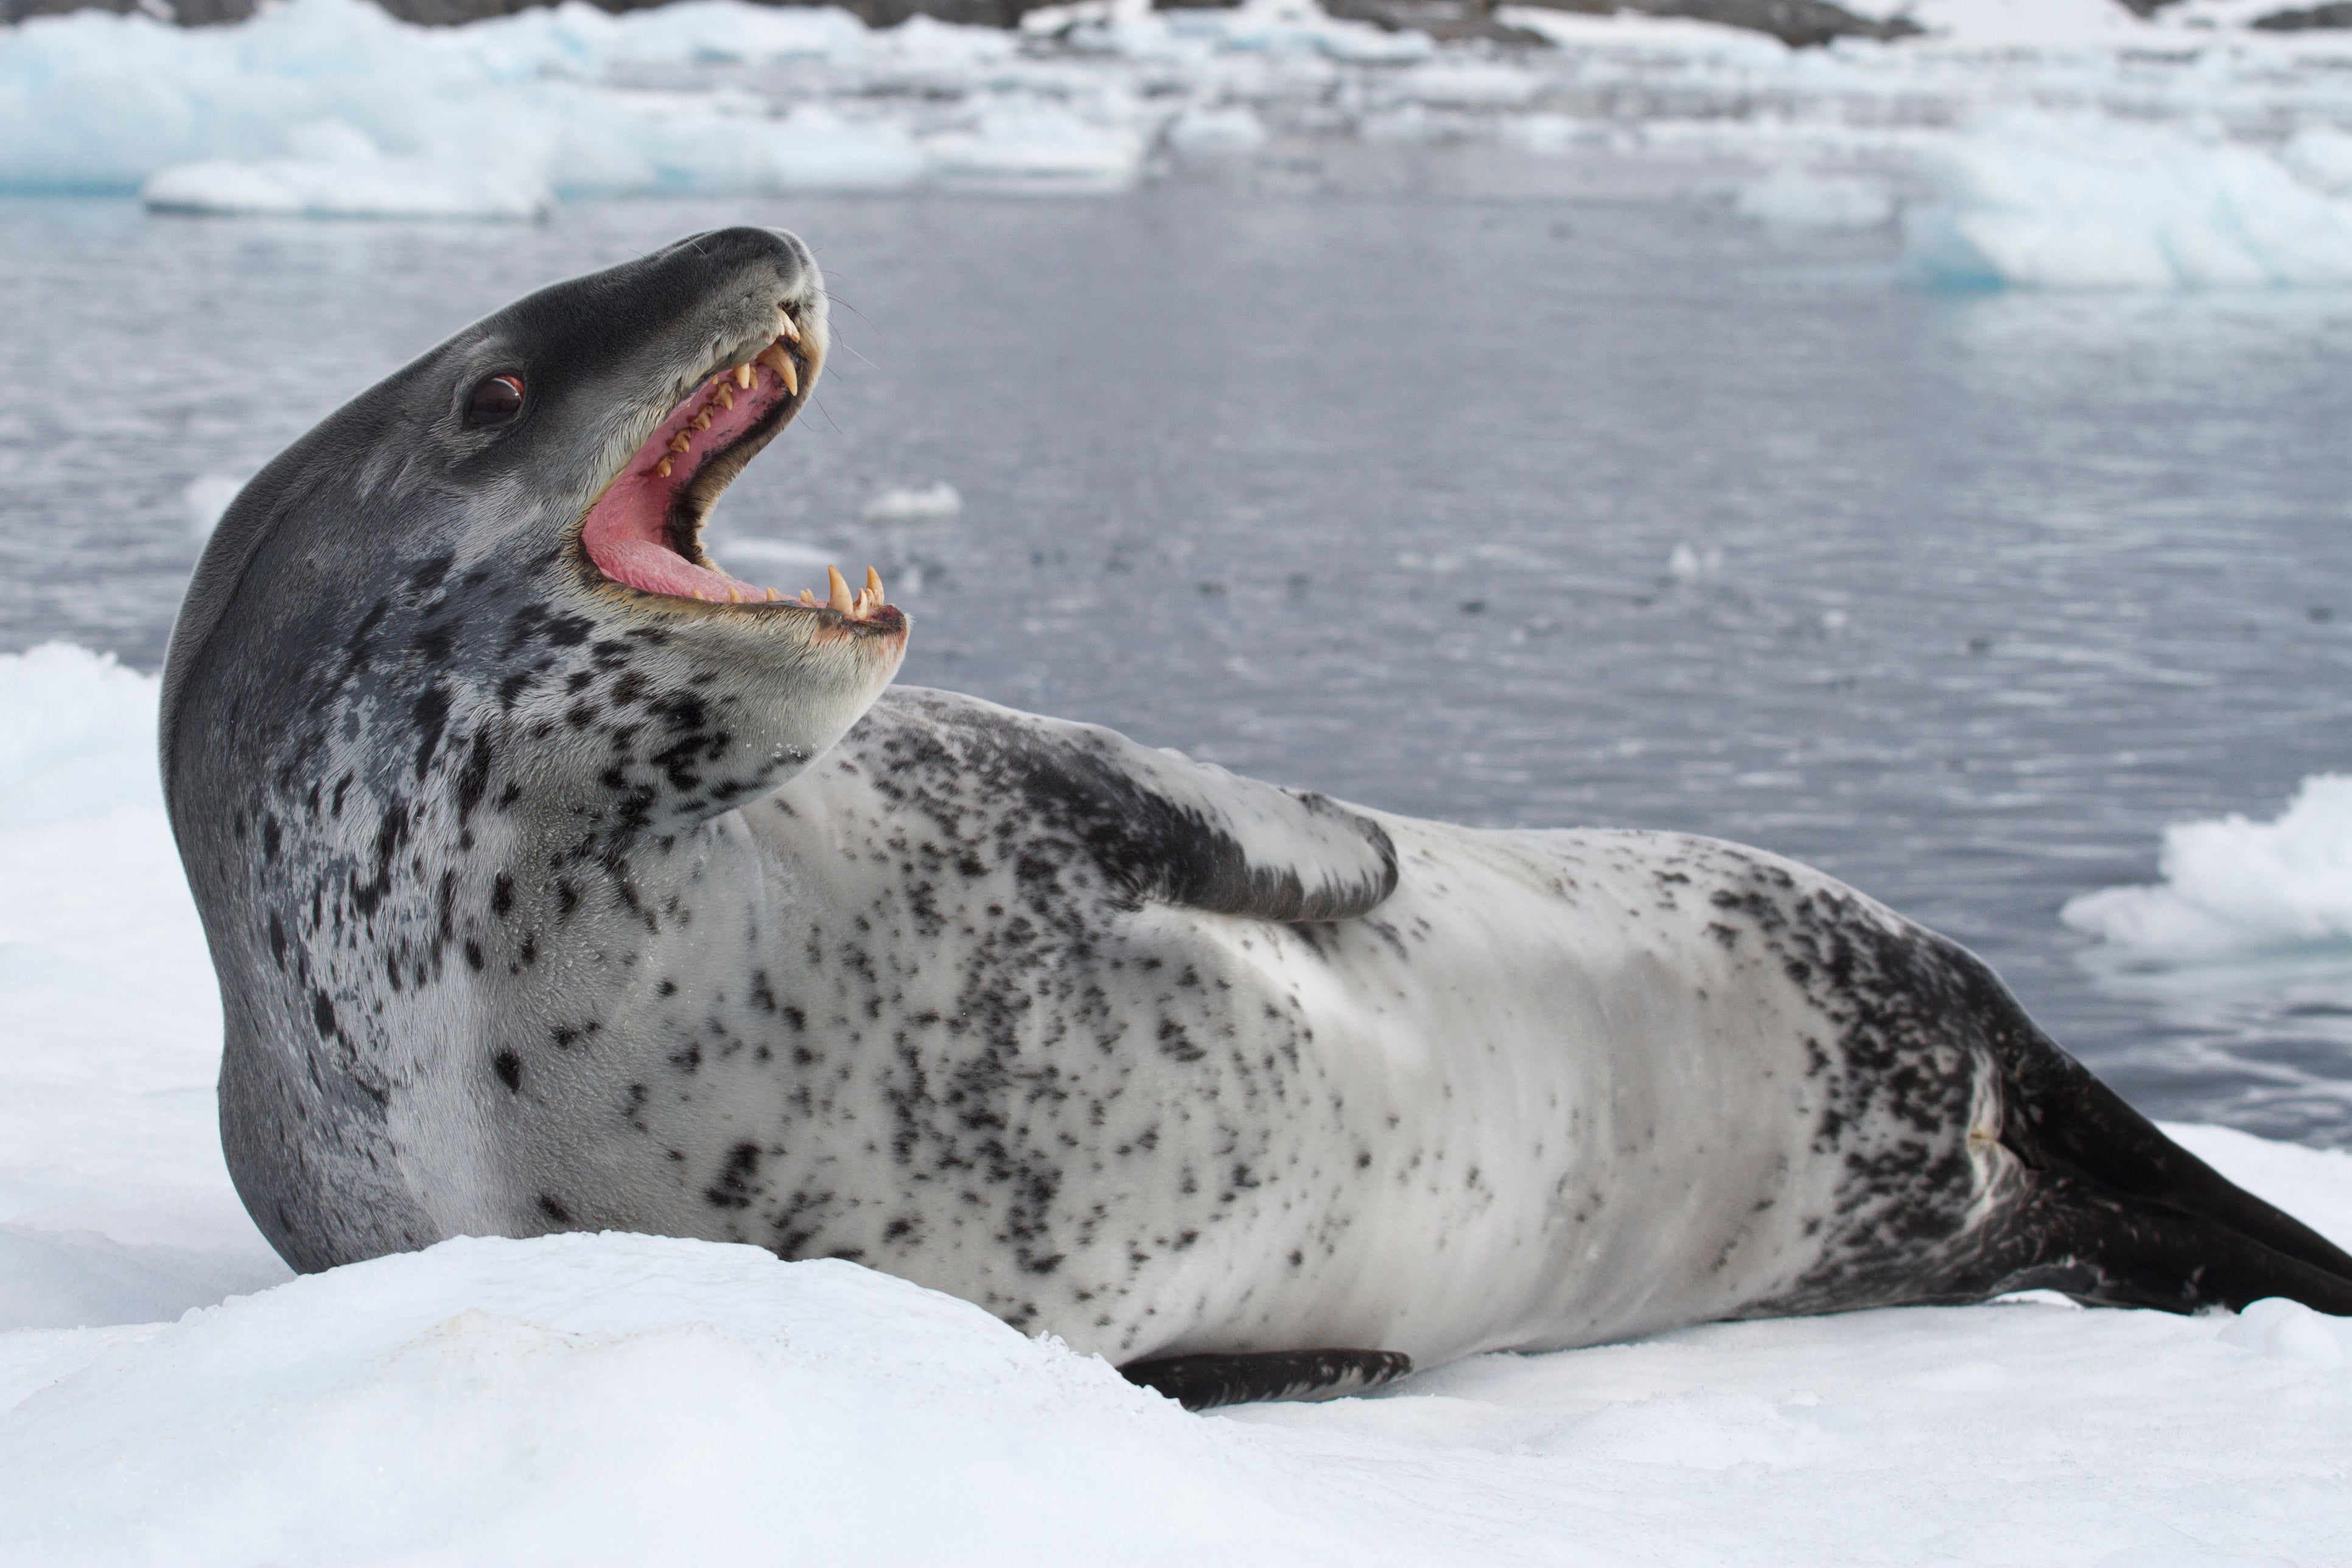 Leopard seals commonly prey on smaller fish, birds and mammals.